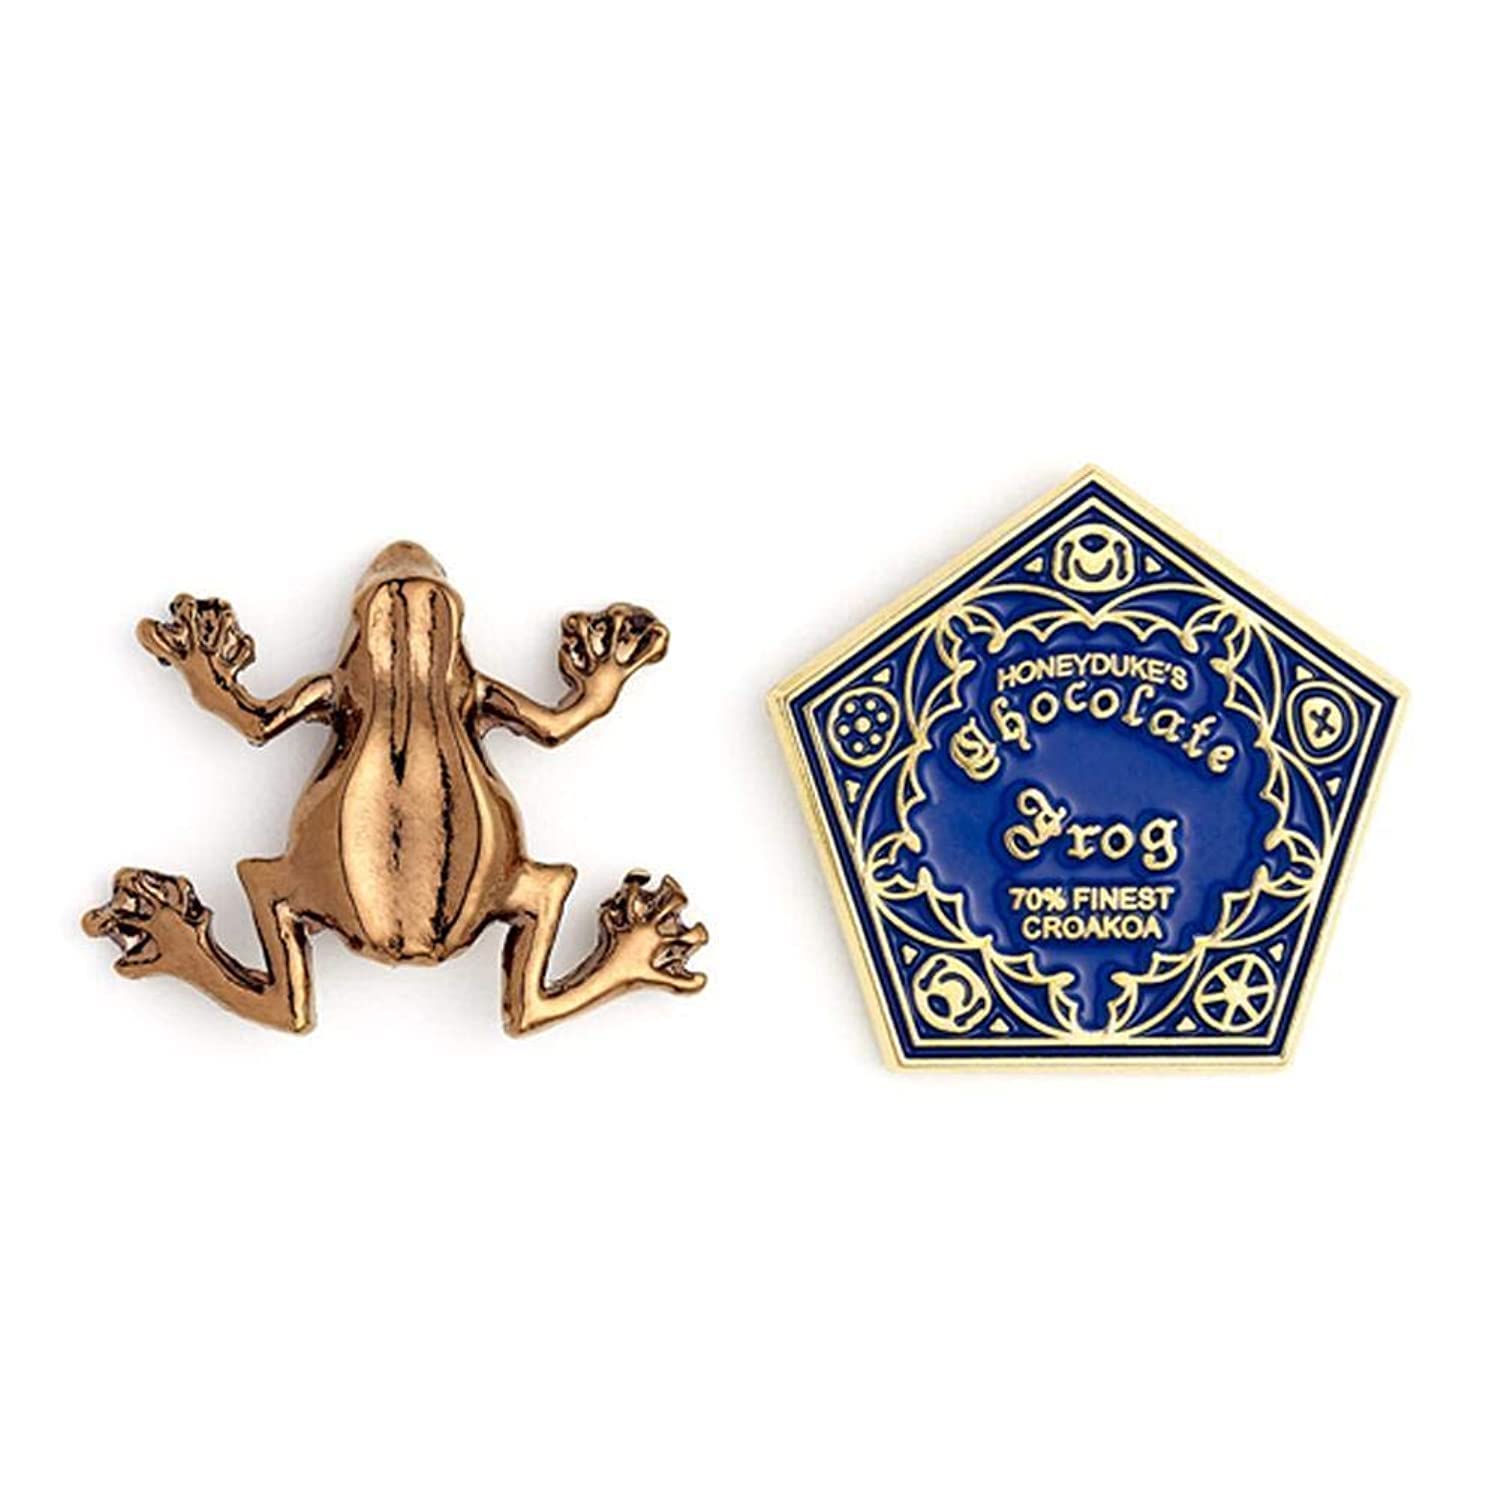 Harry Potter Chocolate Frog Pin Badge